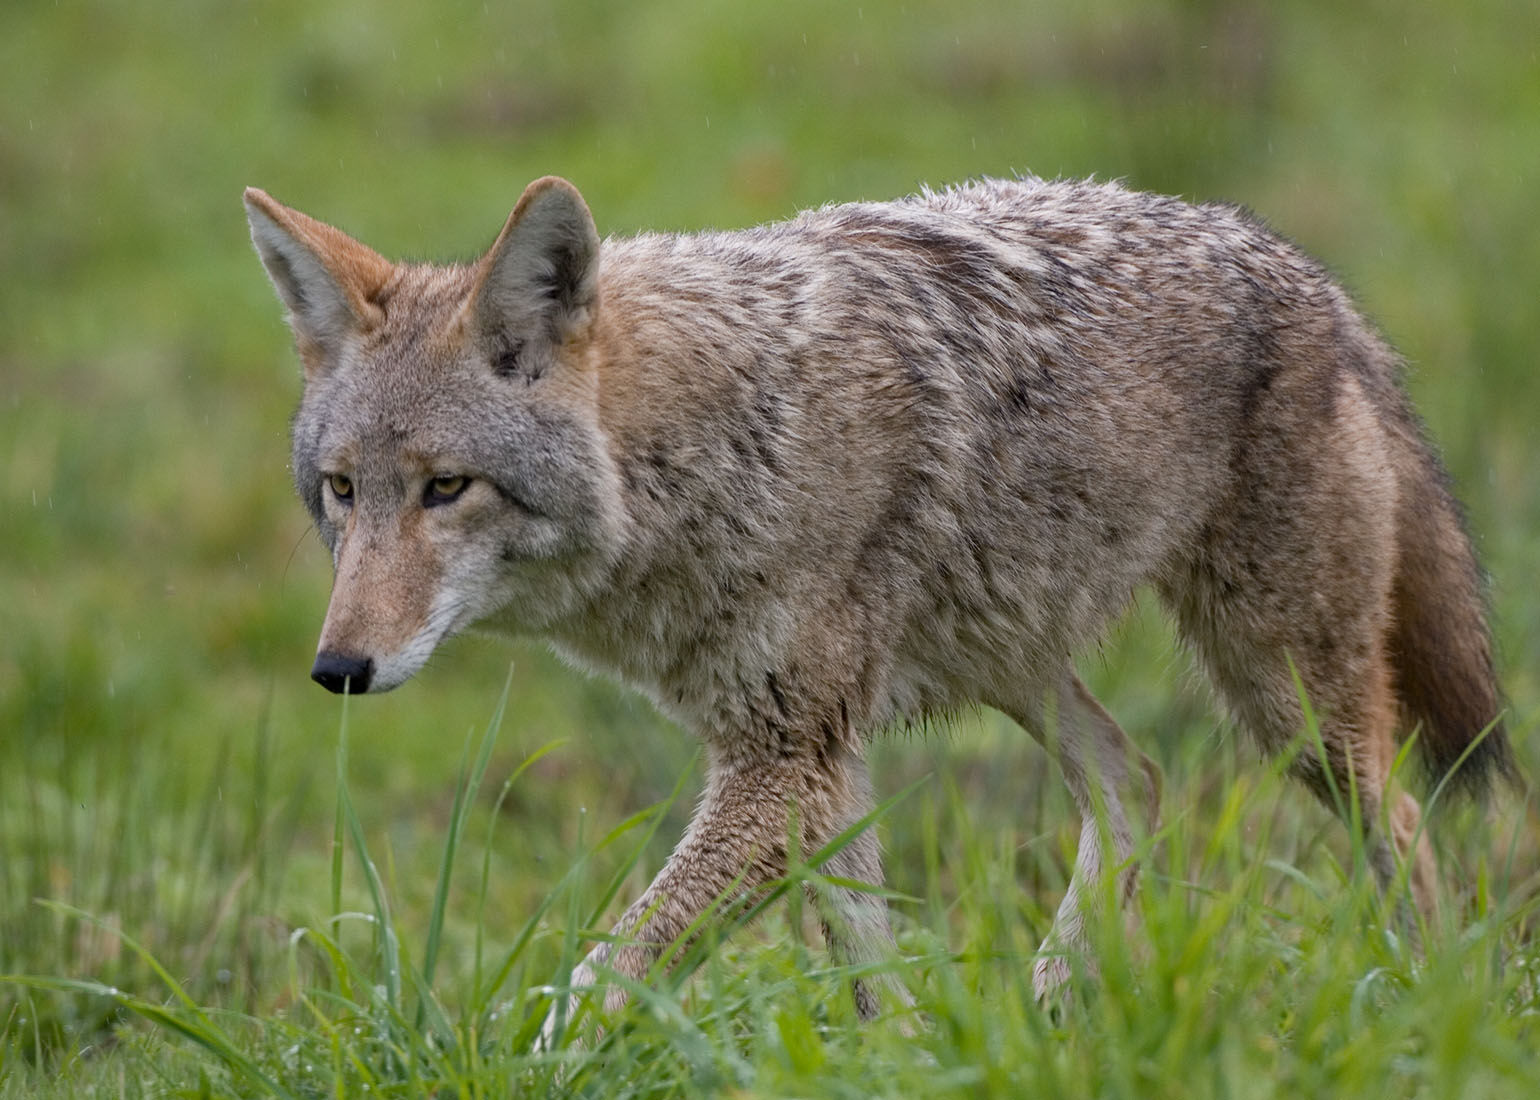 Rockville: Coyote attacked 2 girls, 1 boy went crazy